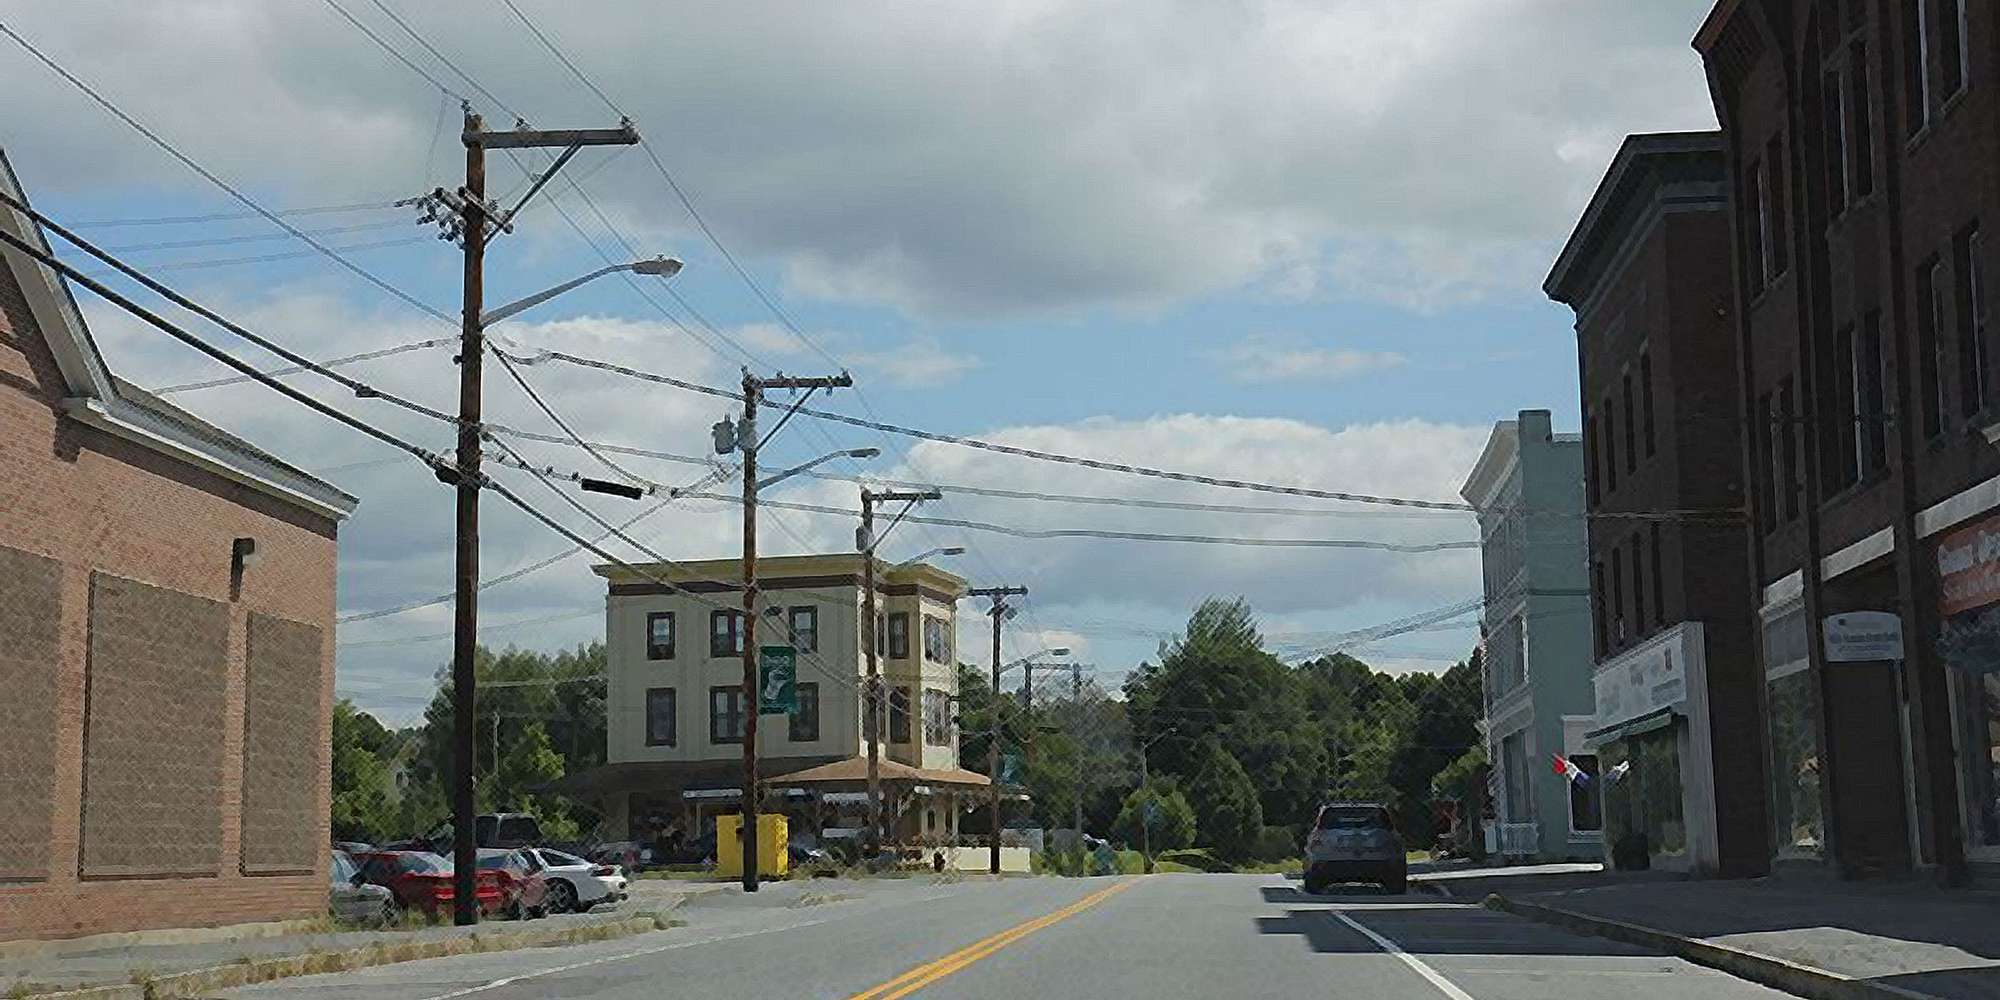 Photos of Main Road in Woodsville, New Hampshire